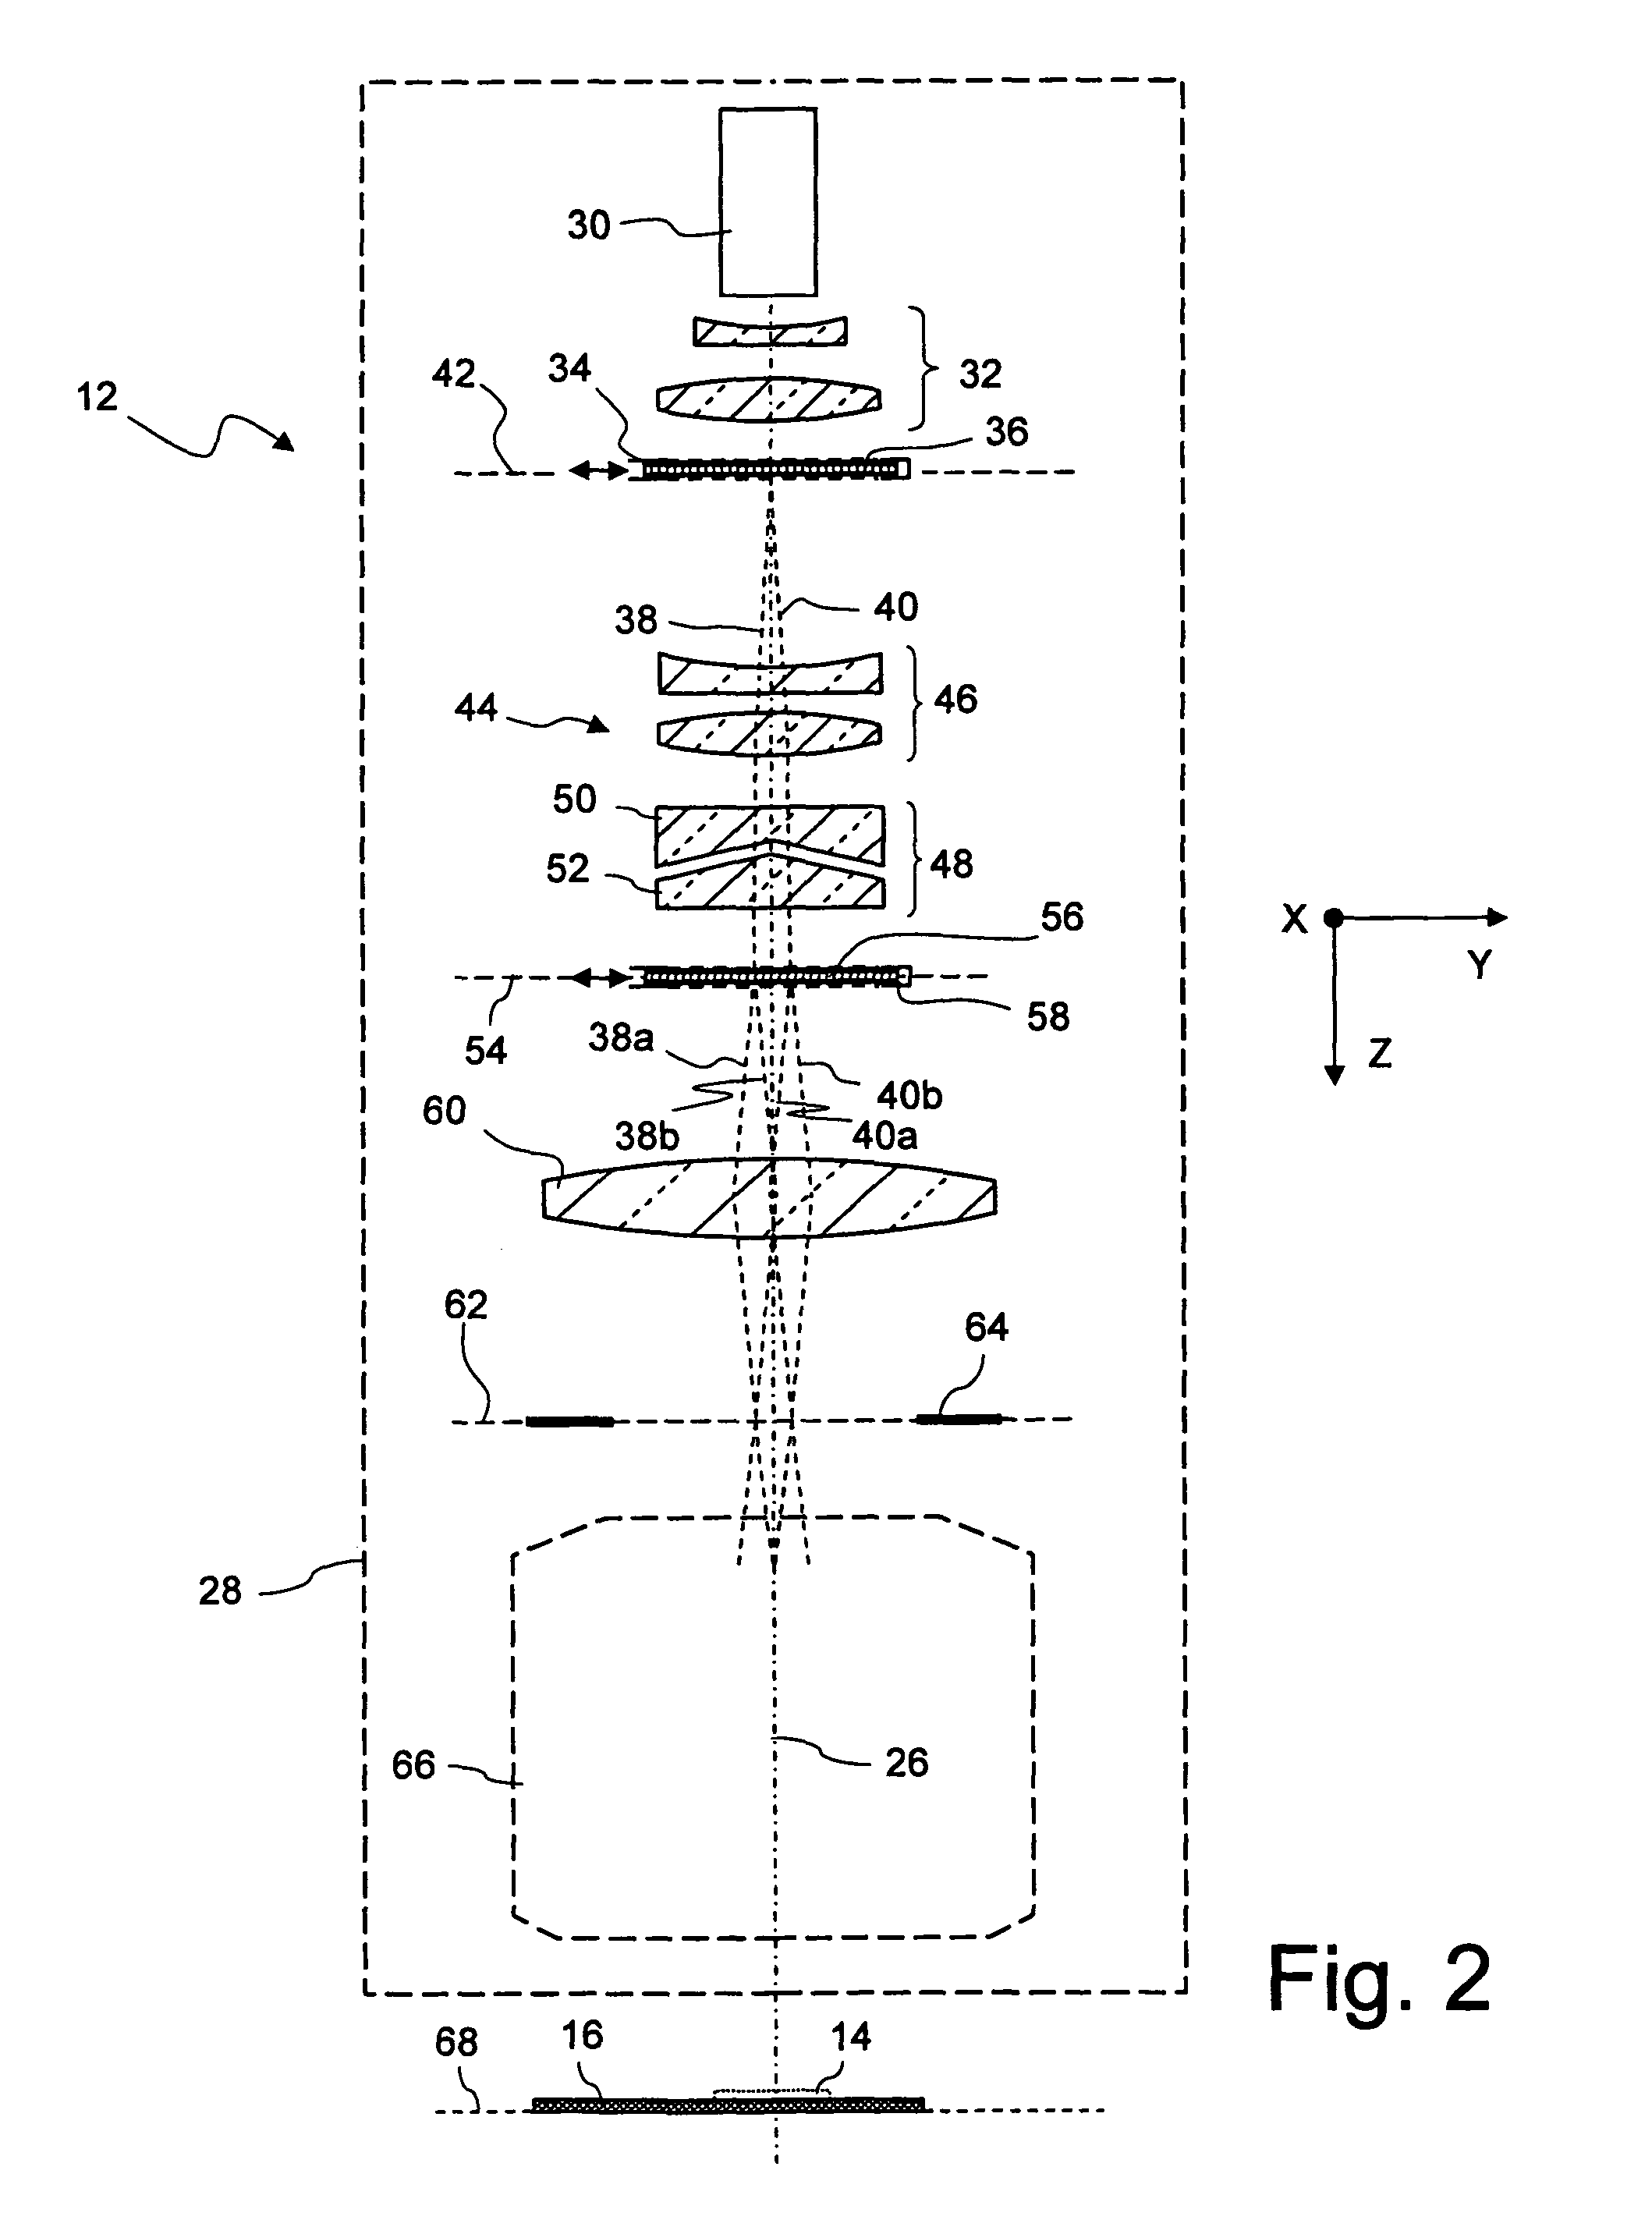 Illumination System for a Microlithgraphic Exposure Apparatus